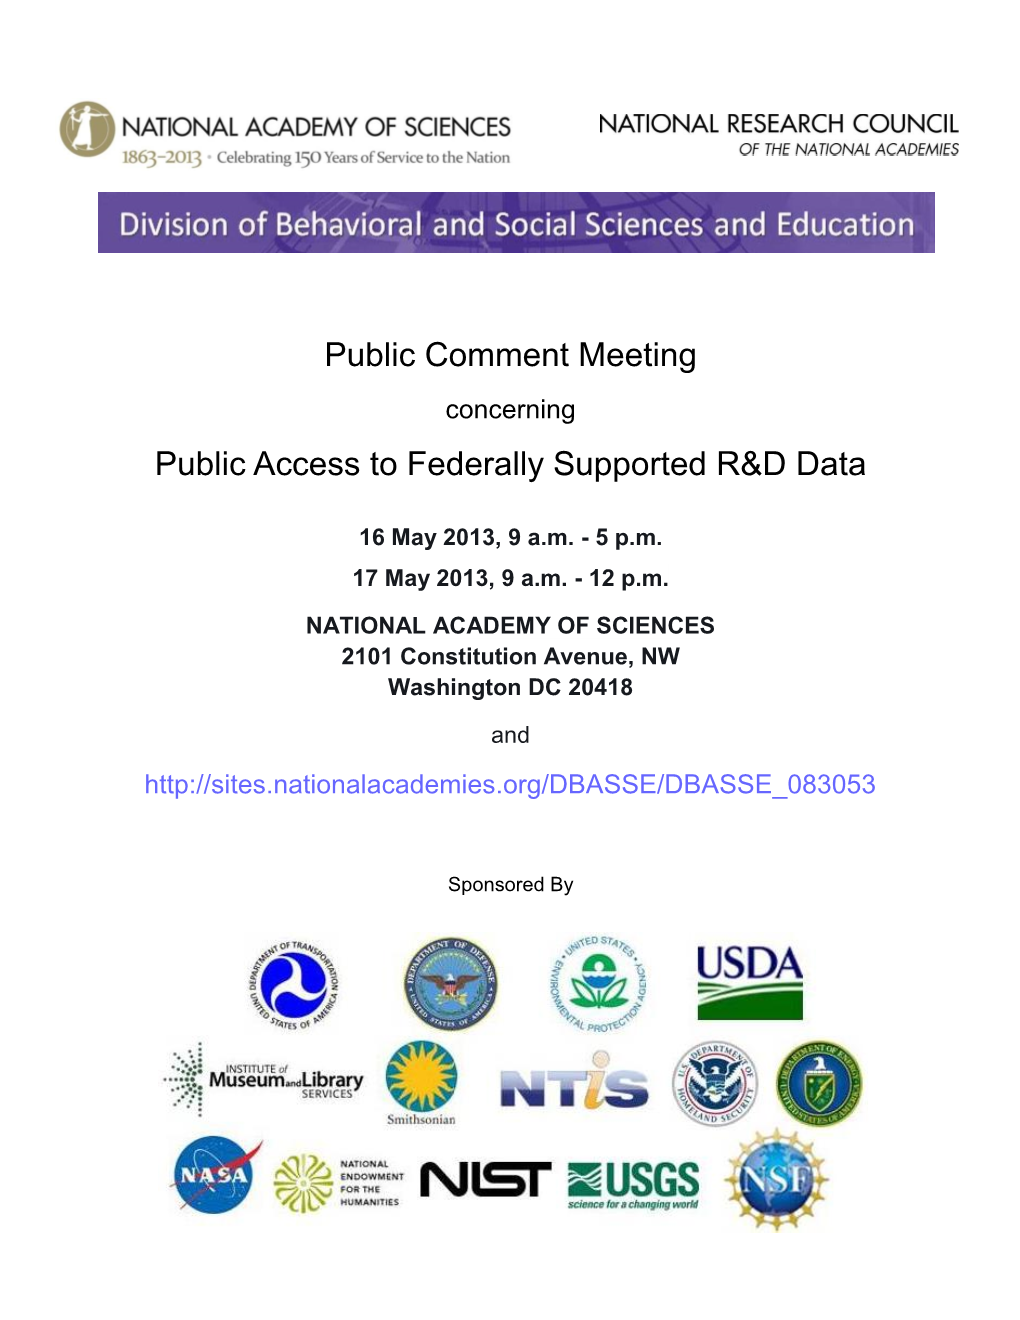 Public Comment Meeting Public Access to Federally Supported R&D